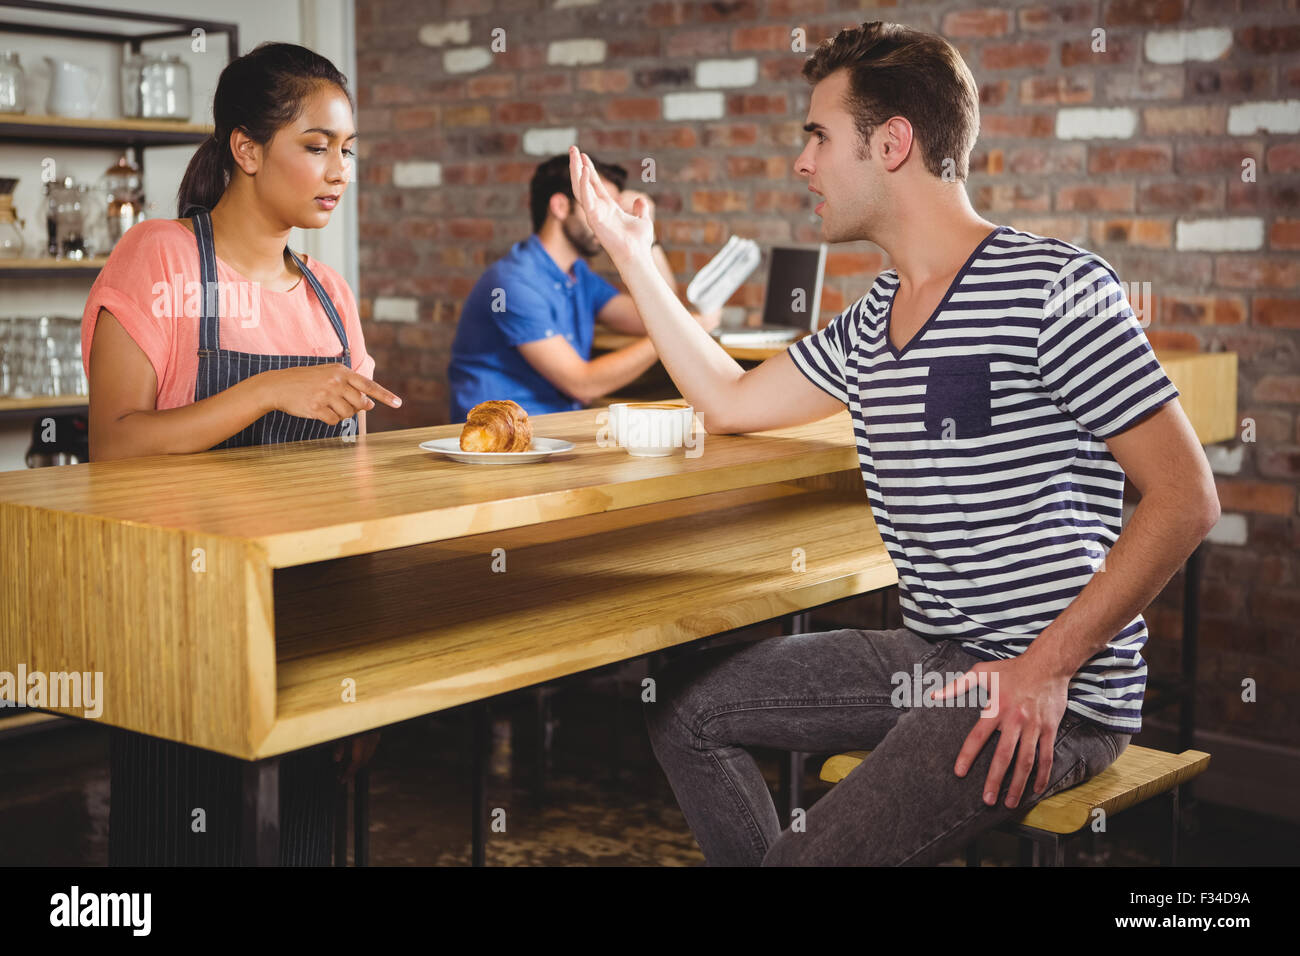 Unhappy customer complaining about the croissant Stock Photo